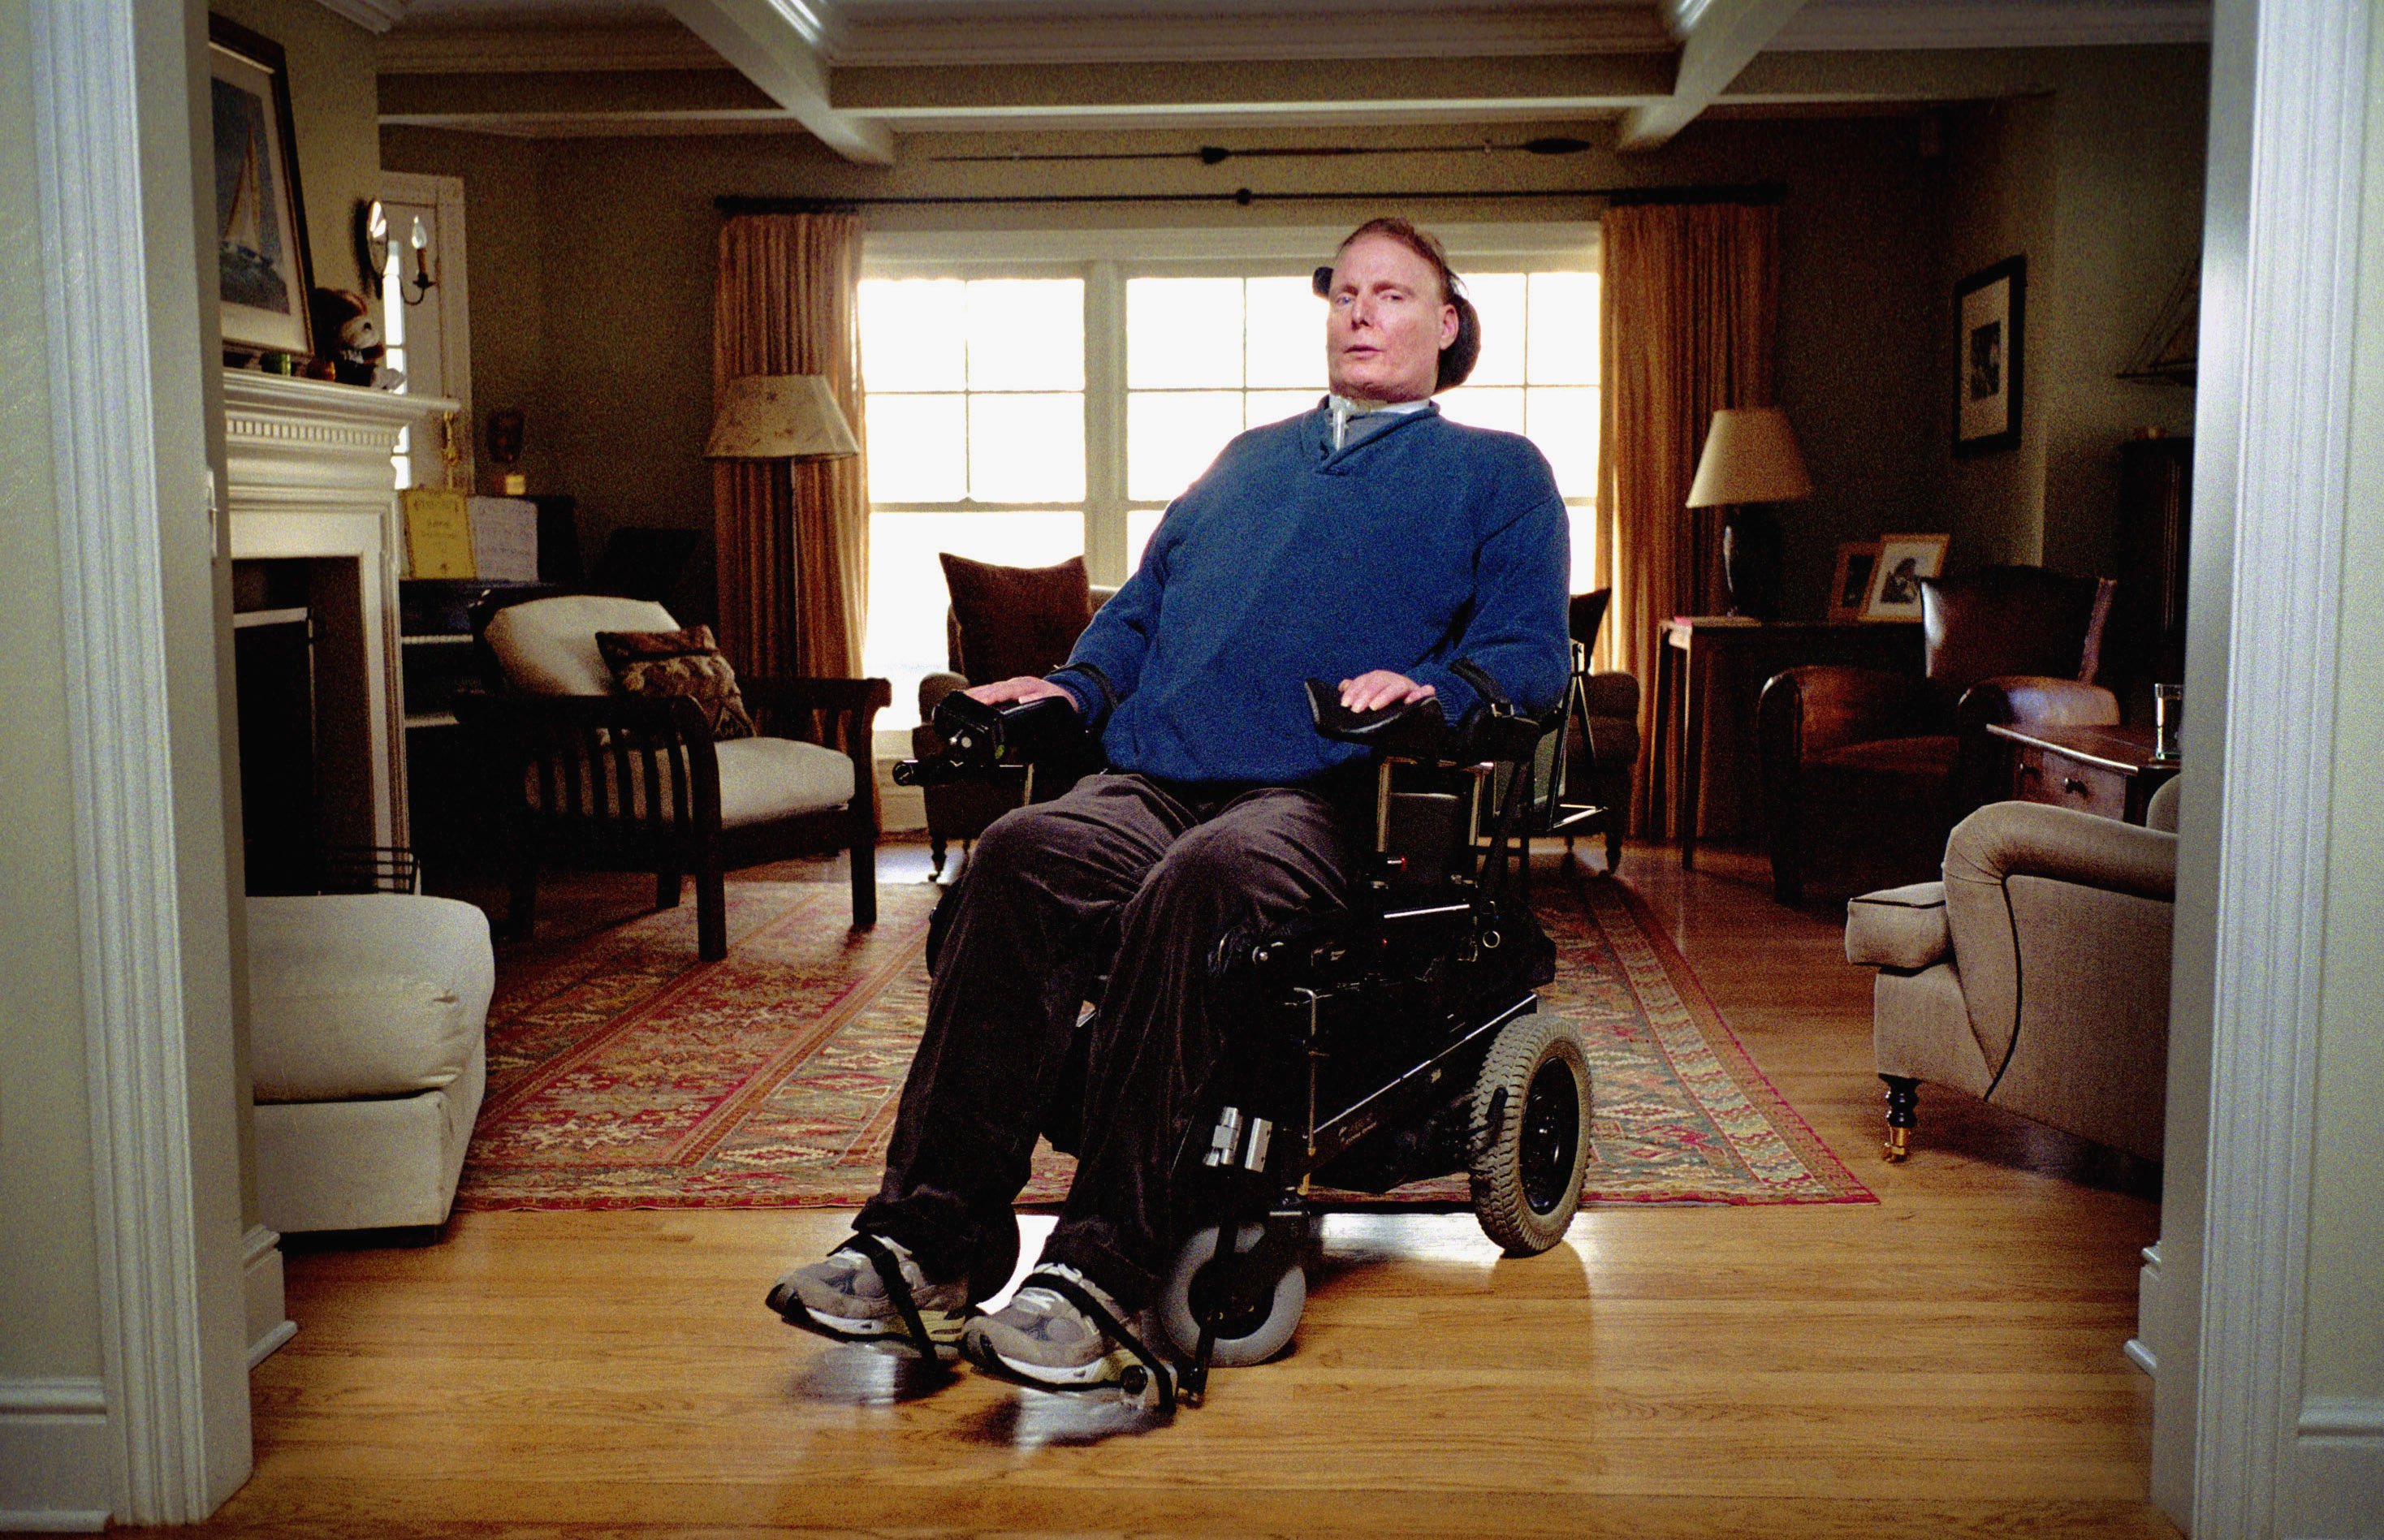 Christopher Reeve photographed in the lounge area of his home in upstate New York. / Source: Getty Images